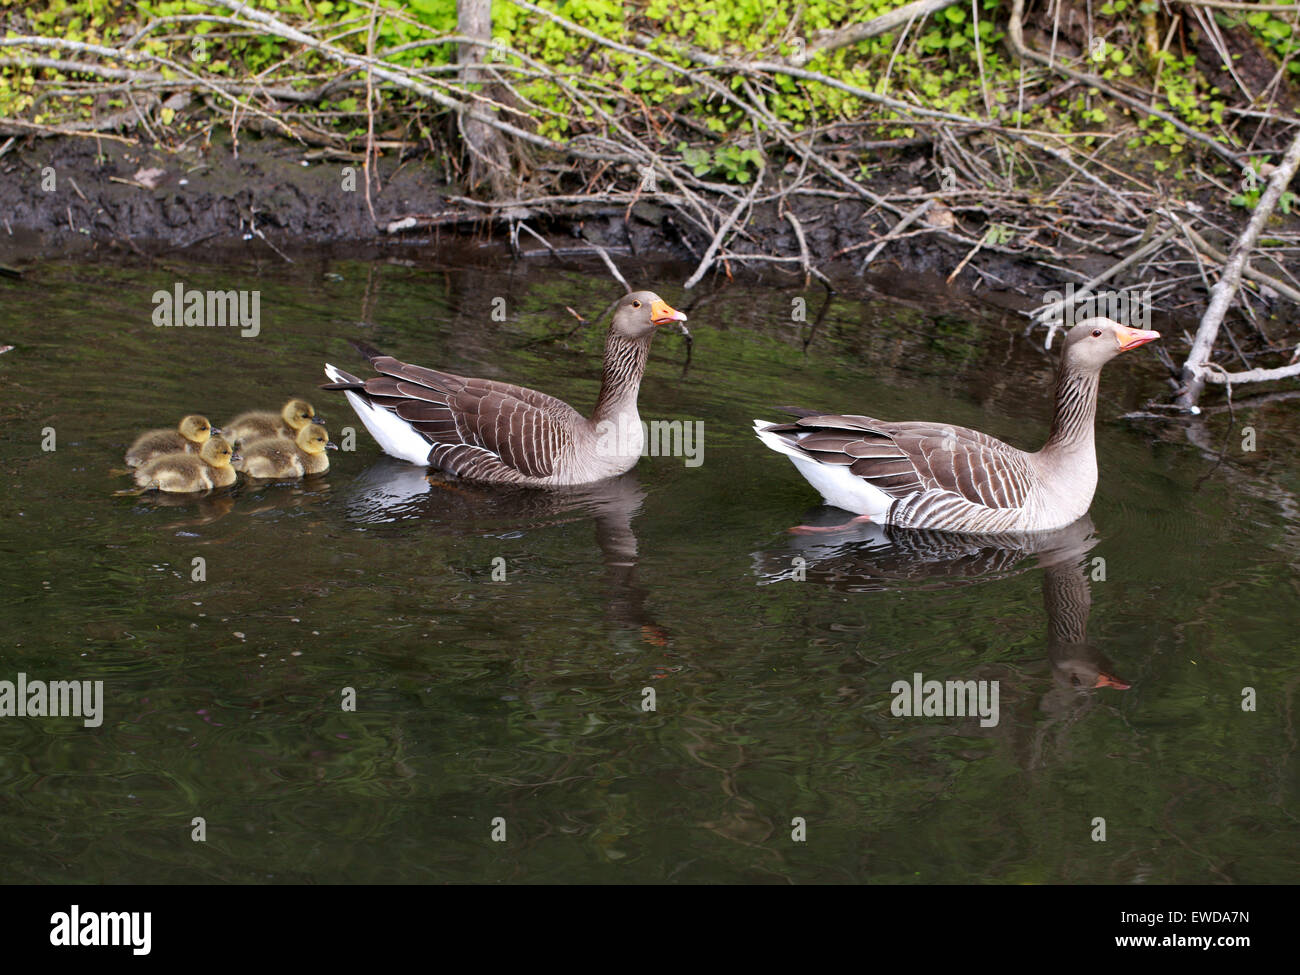 Family of Wild Greylag Geese, Anser anser, Anatidae. Swimming on a River with Four Goslings. Stock Photo